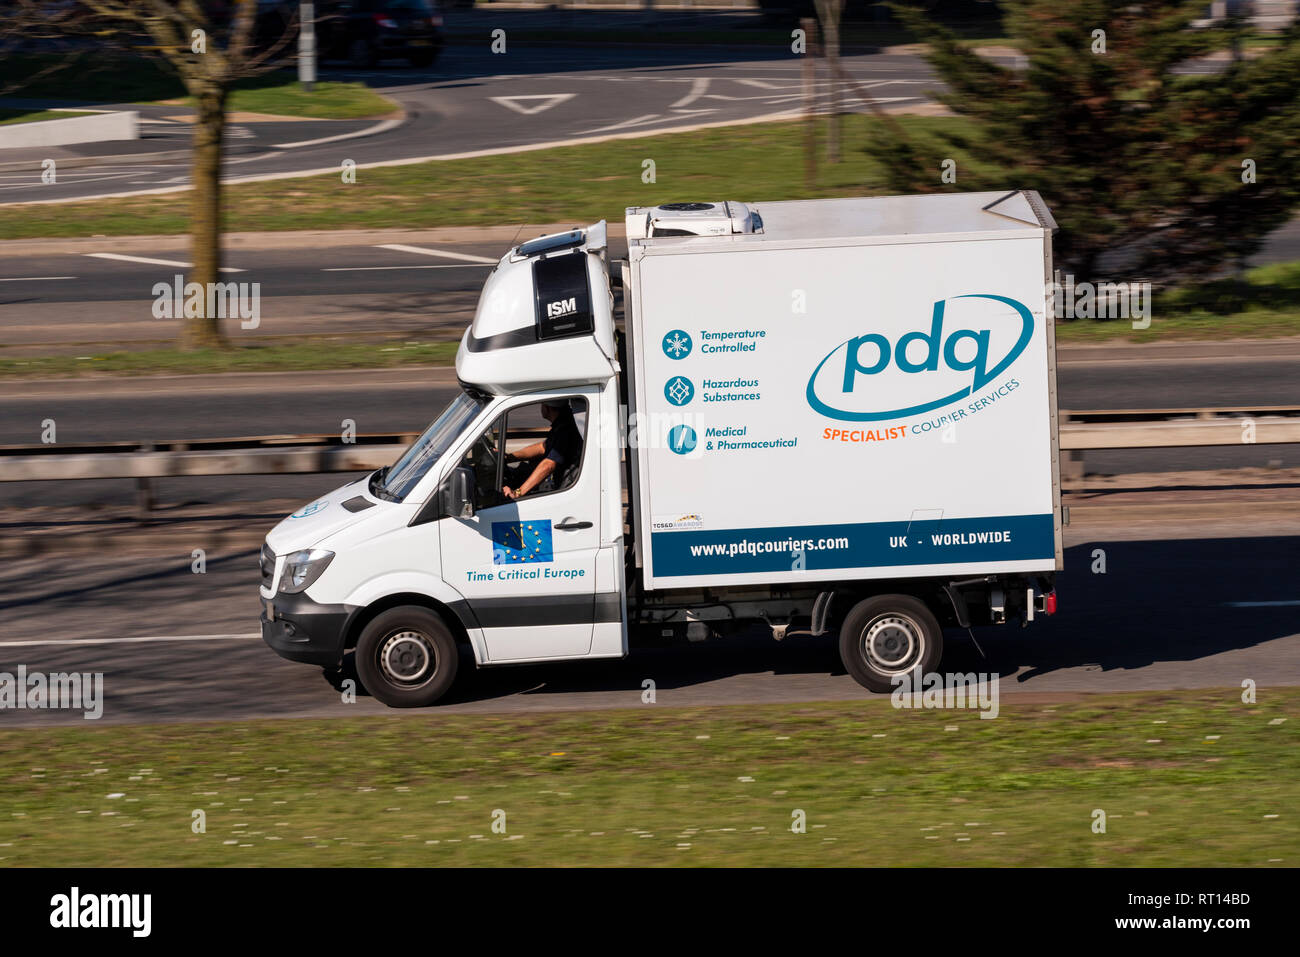 PDQ specialist couriers. Specialist courier services van temperature controlled. Time critical europe medical and pharmaceutical supplies Stock Photo